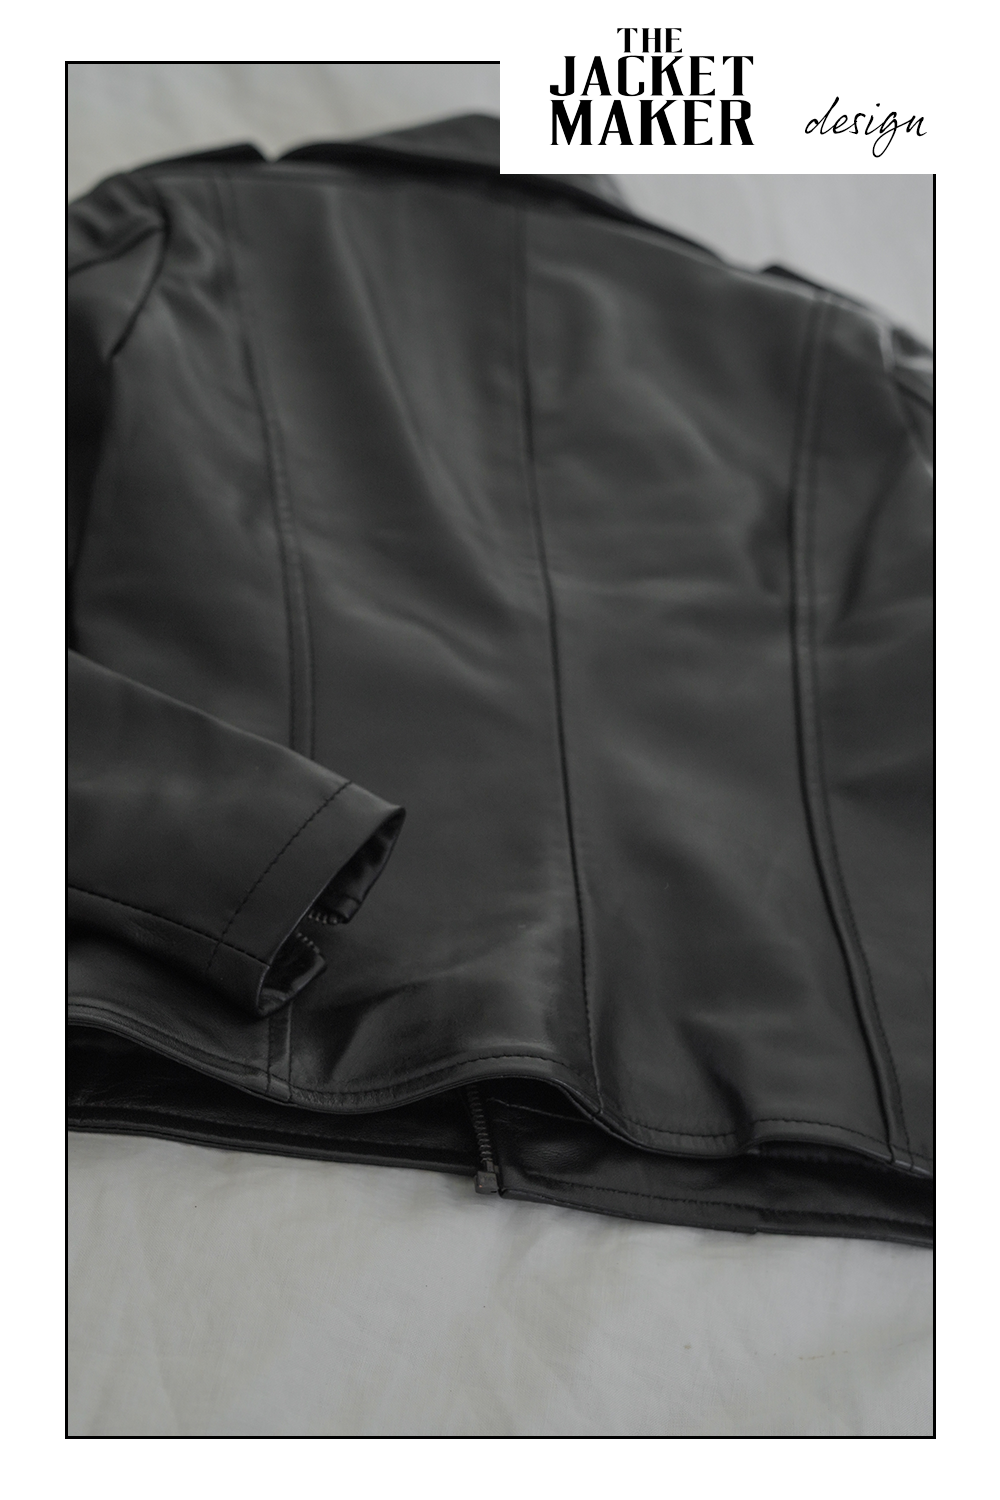  leather jacket review, womens leather jackets, womens biker jackets, black leather jackets, leather jackets under 300, real leather jacket for less, best leather jackets for women 